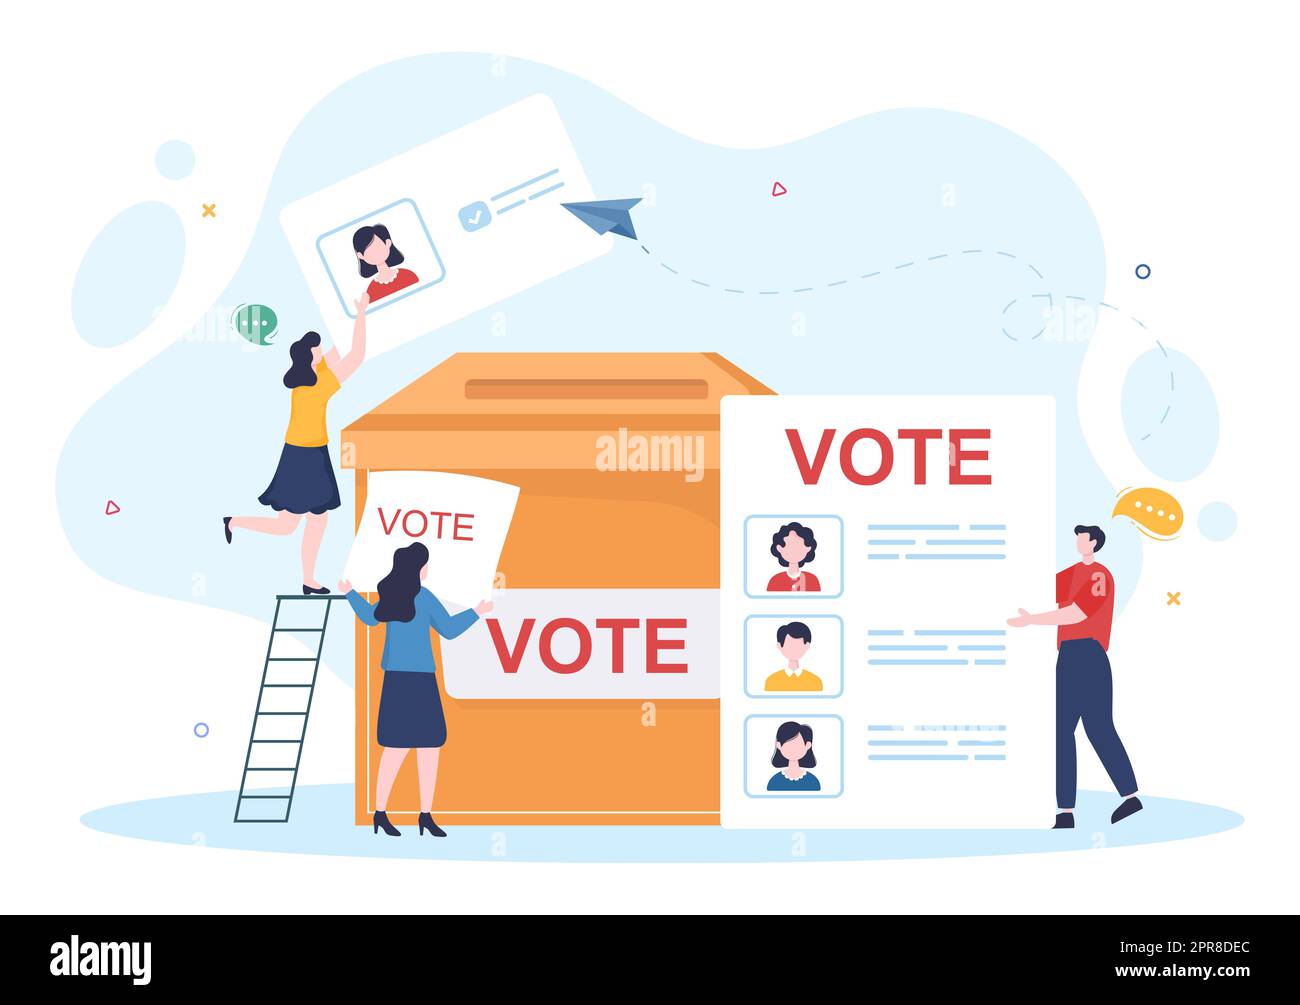 Political Candidate Cartoon Hand Drawn Illustration with Debates Concept for Promotion, Election Campaign, Active Discussion and Get Votes Stock Photo